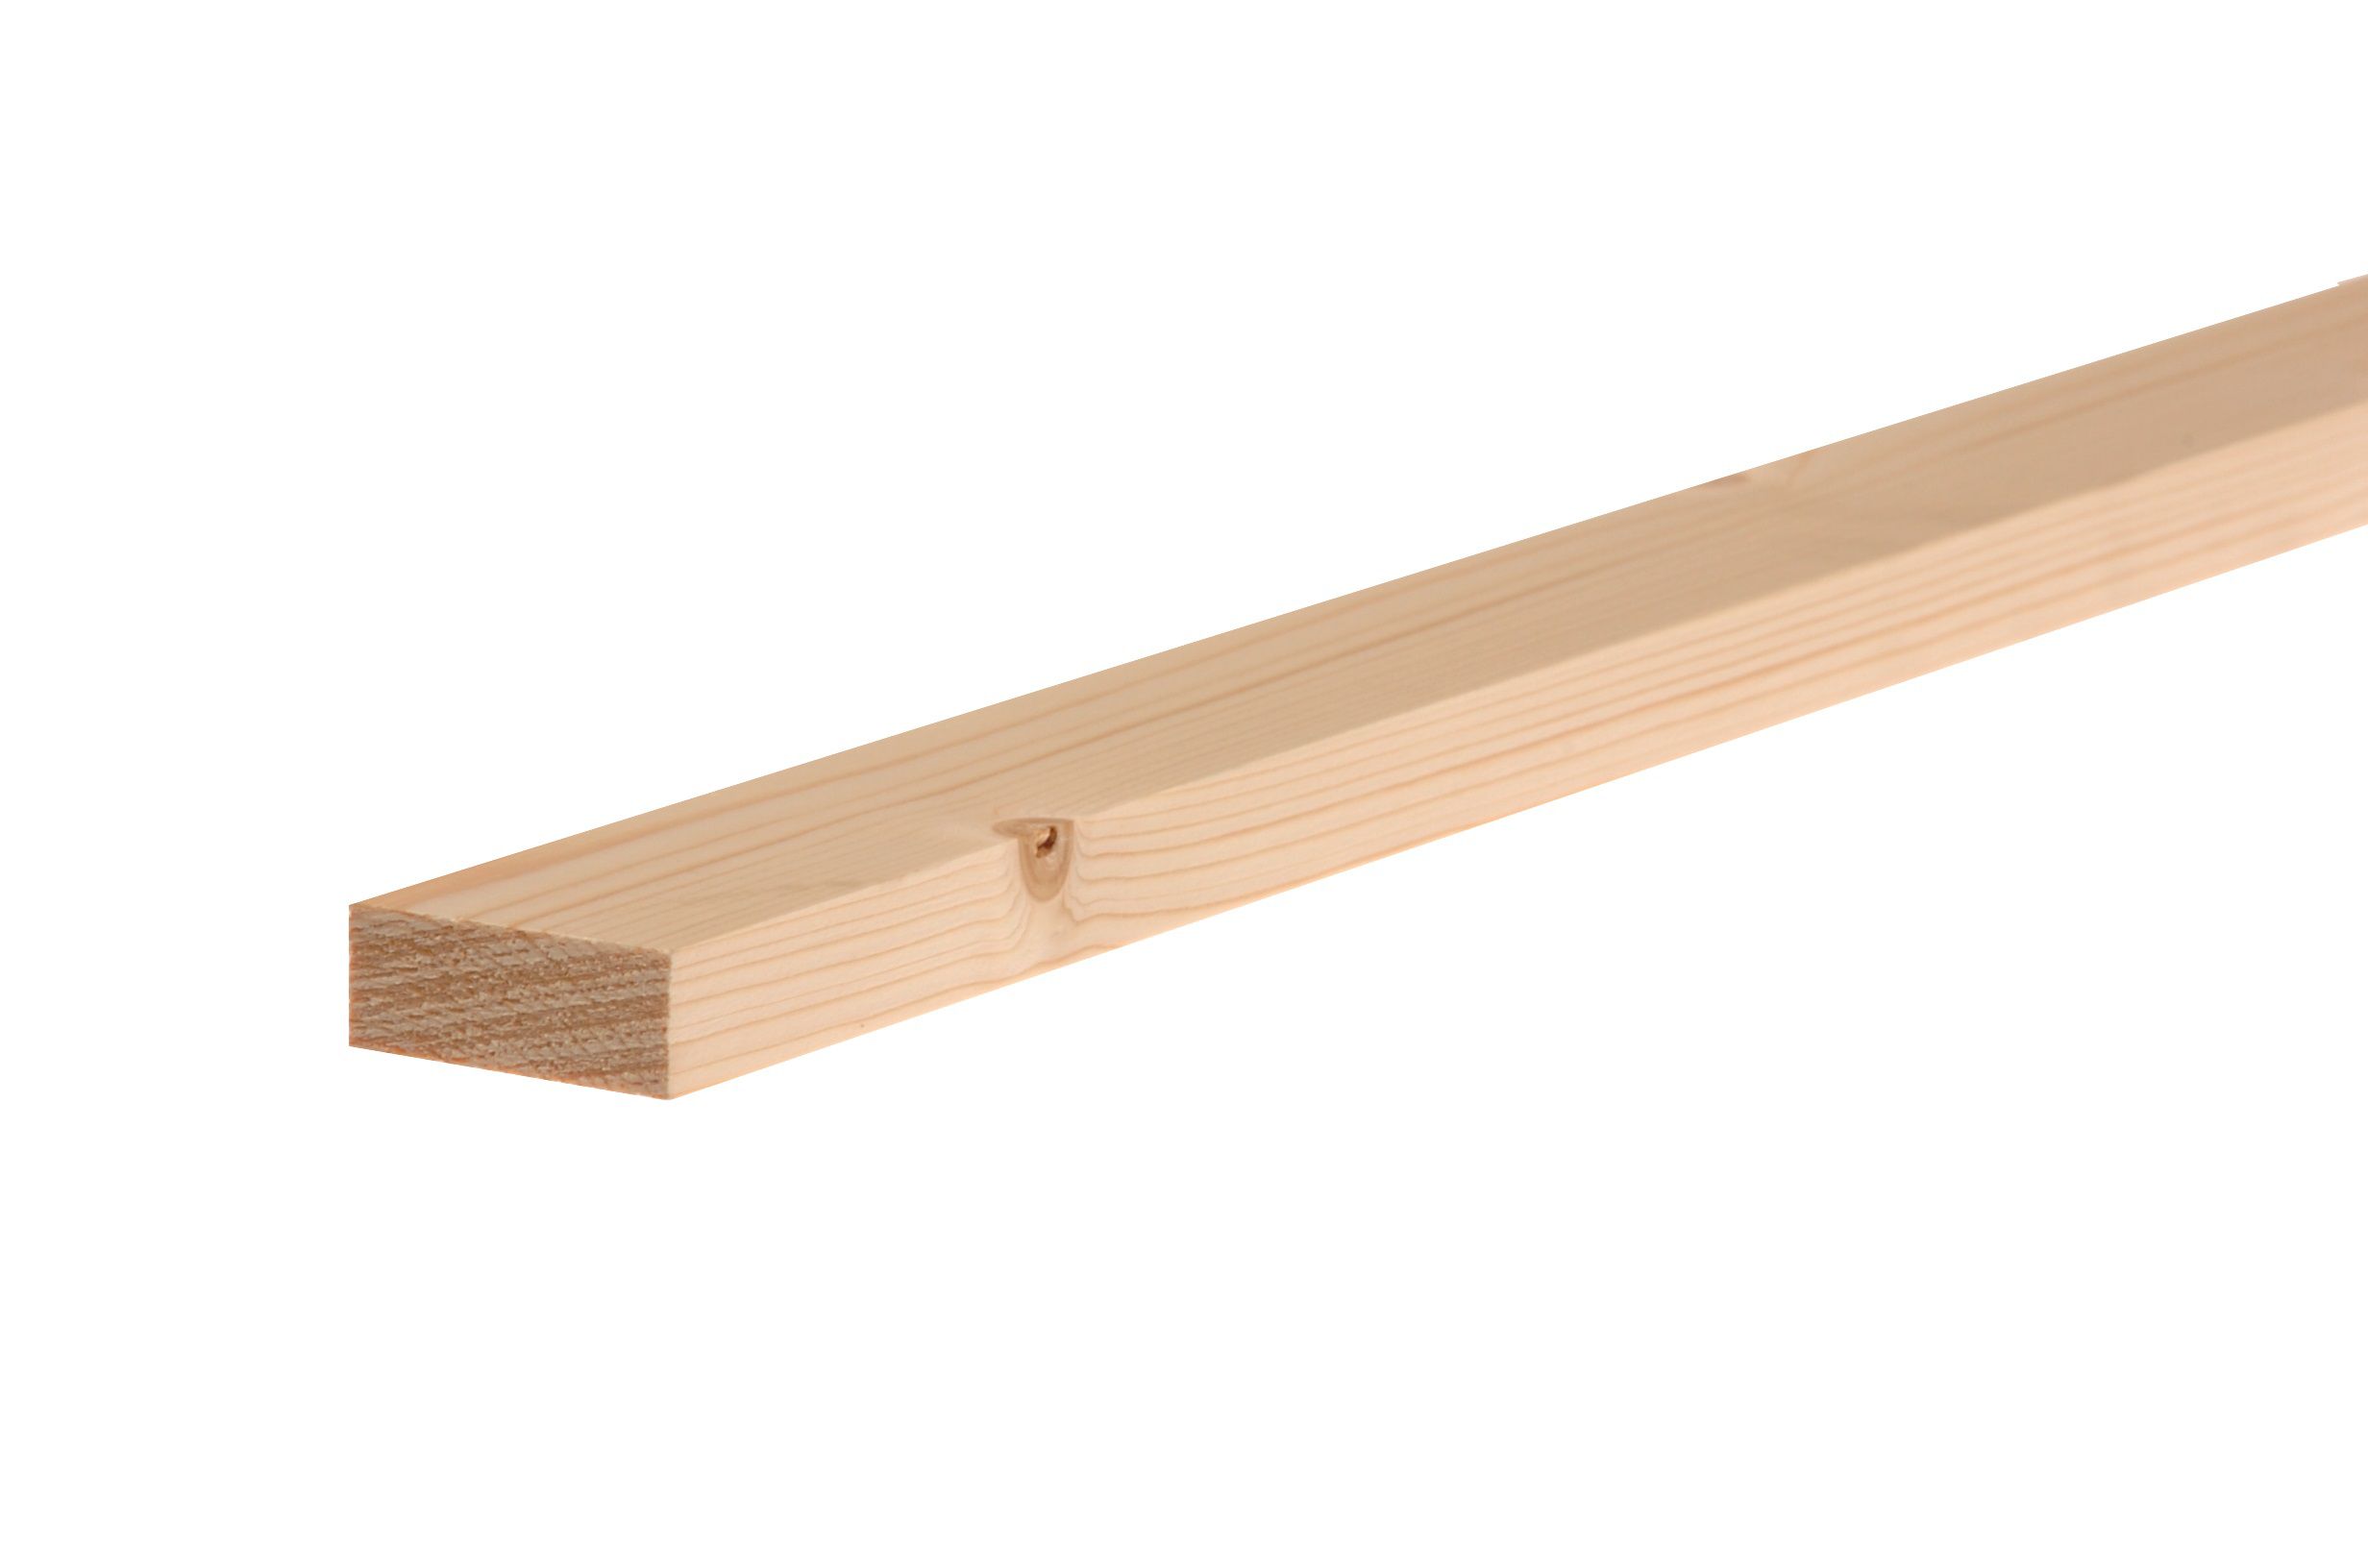 Smooth Planed Square edge Stick timber (L)1.8m (W)44mm (T)18mm